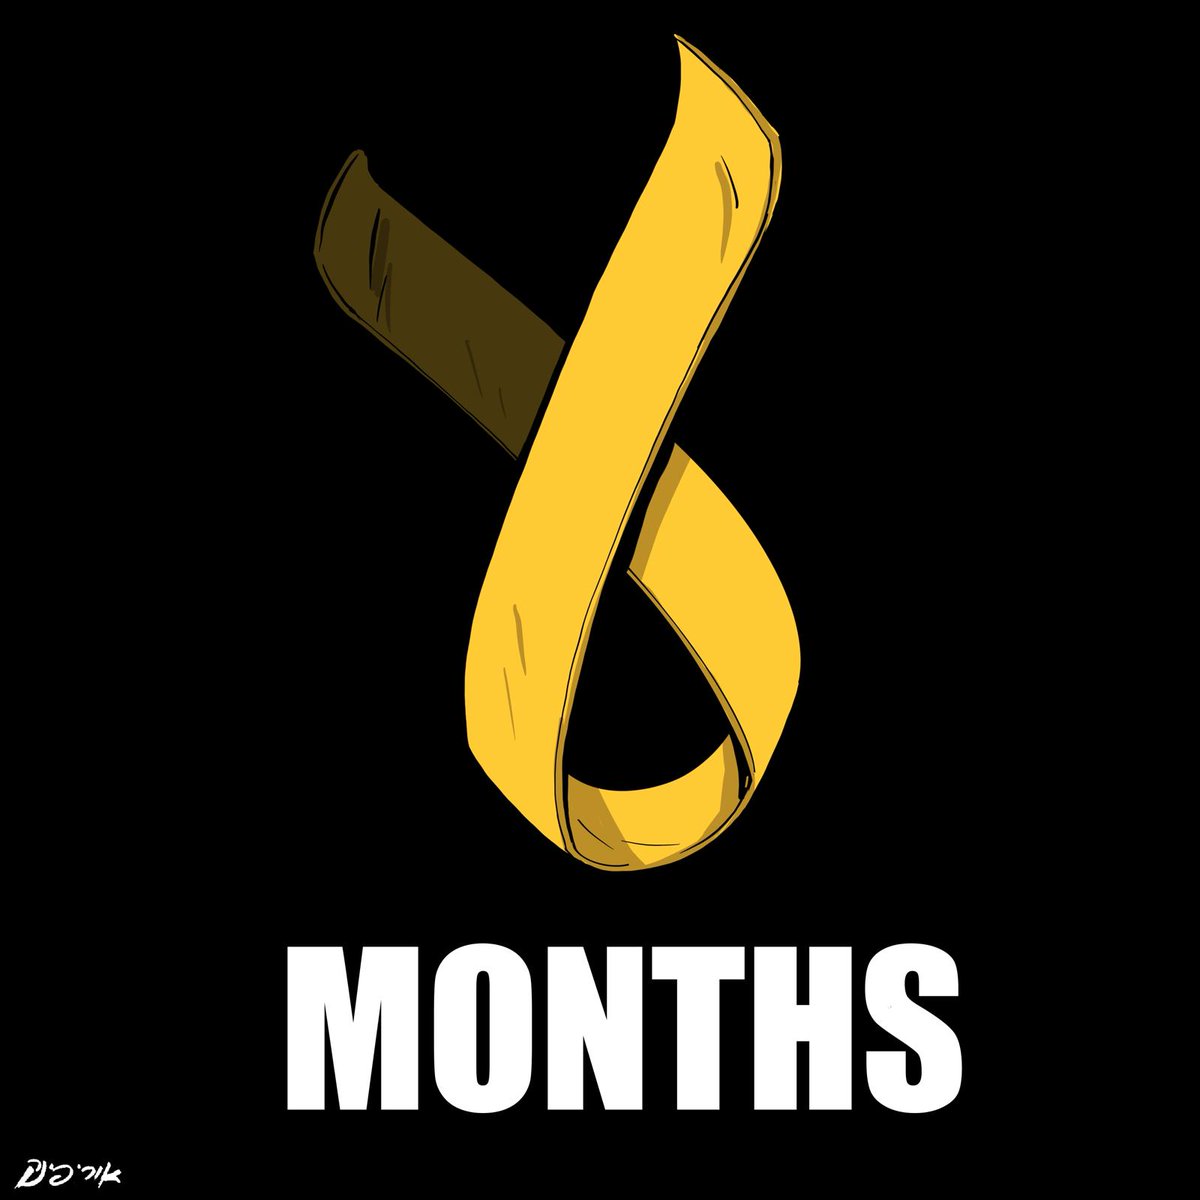 Who would have believed that 6 months later we’ll still be waiting for their return. Bring them home back now By: @zbengolem #hamasisisis #israelunderattack #swordsofiron #standwithisrael #SupportIsrael #unitedwithisrael #bringthemhomenow #bringthemhome #MeTooUnlessYoureAJew